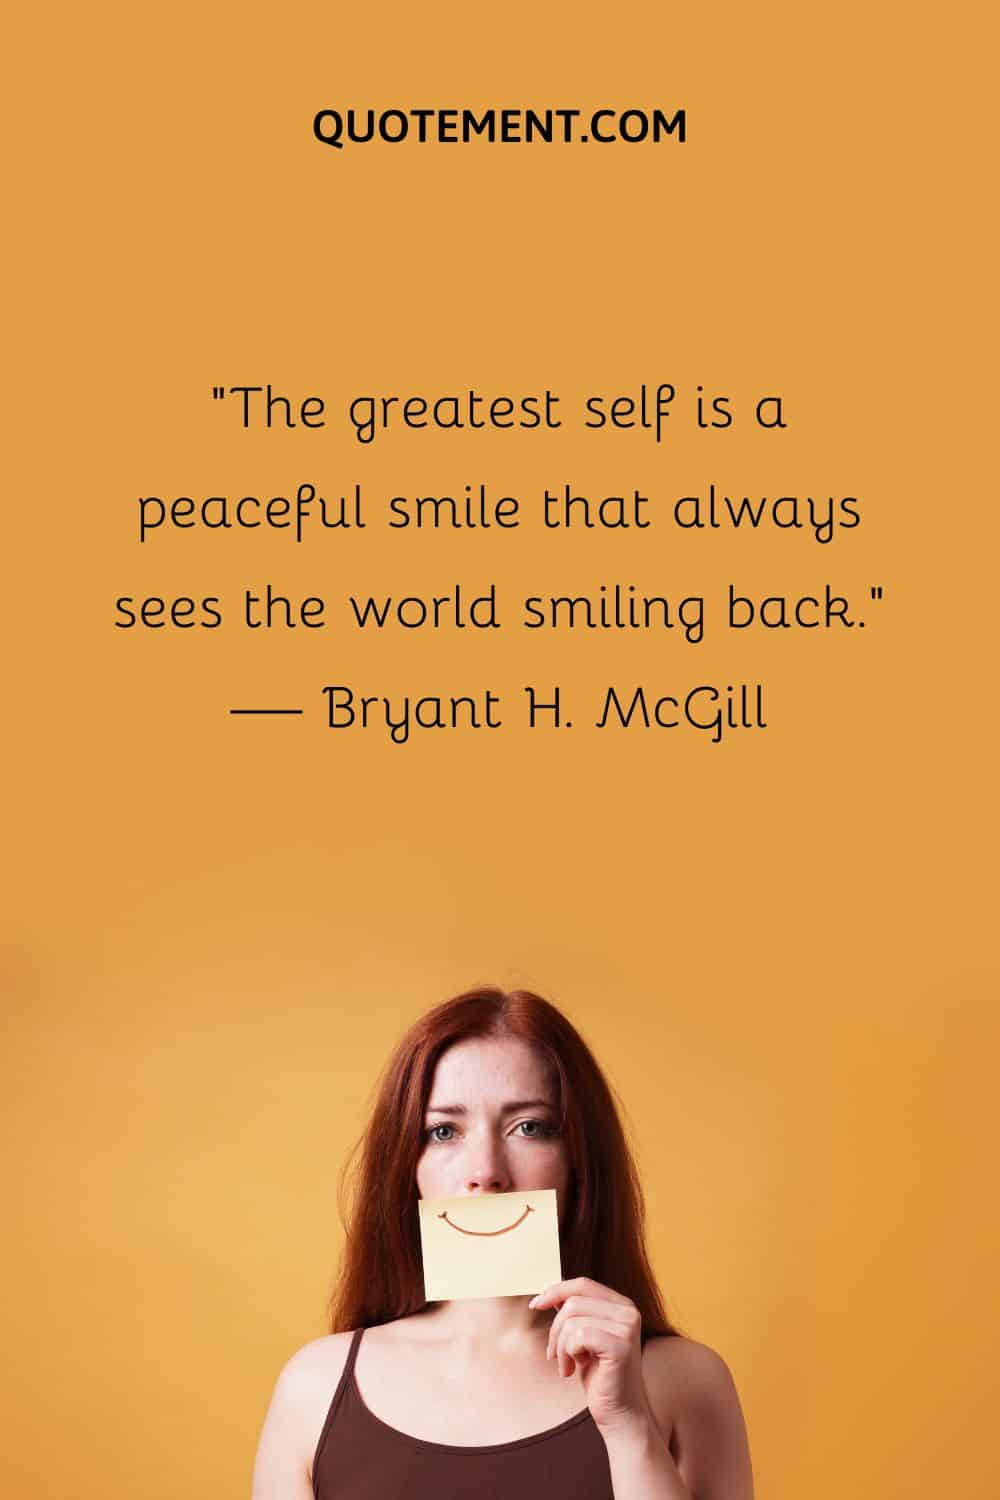 The greatest self is a peaceful smile that always sees the world smiling back